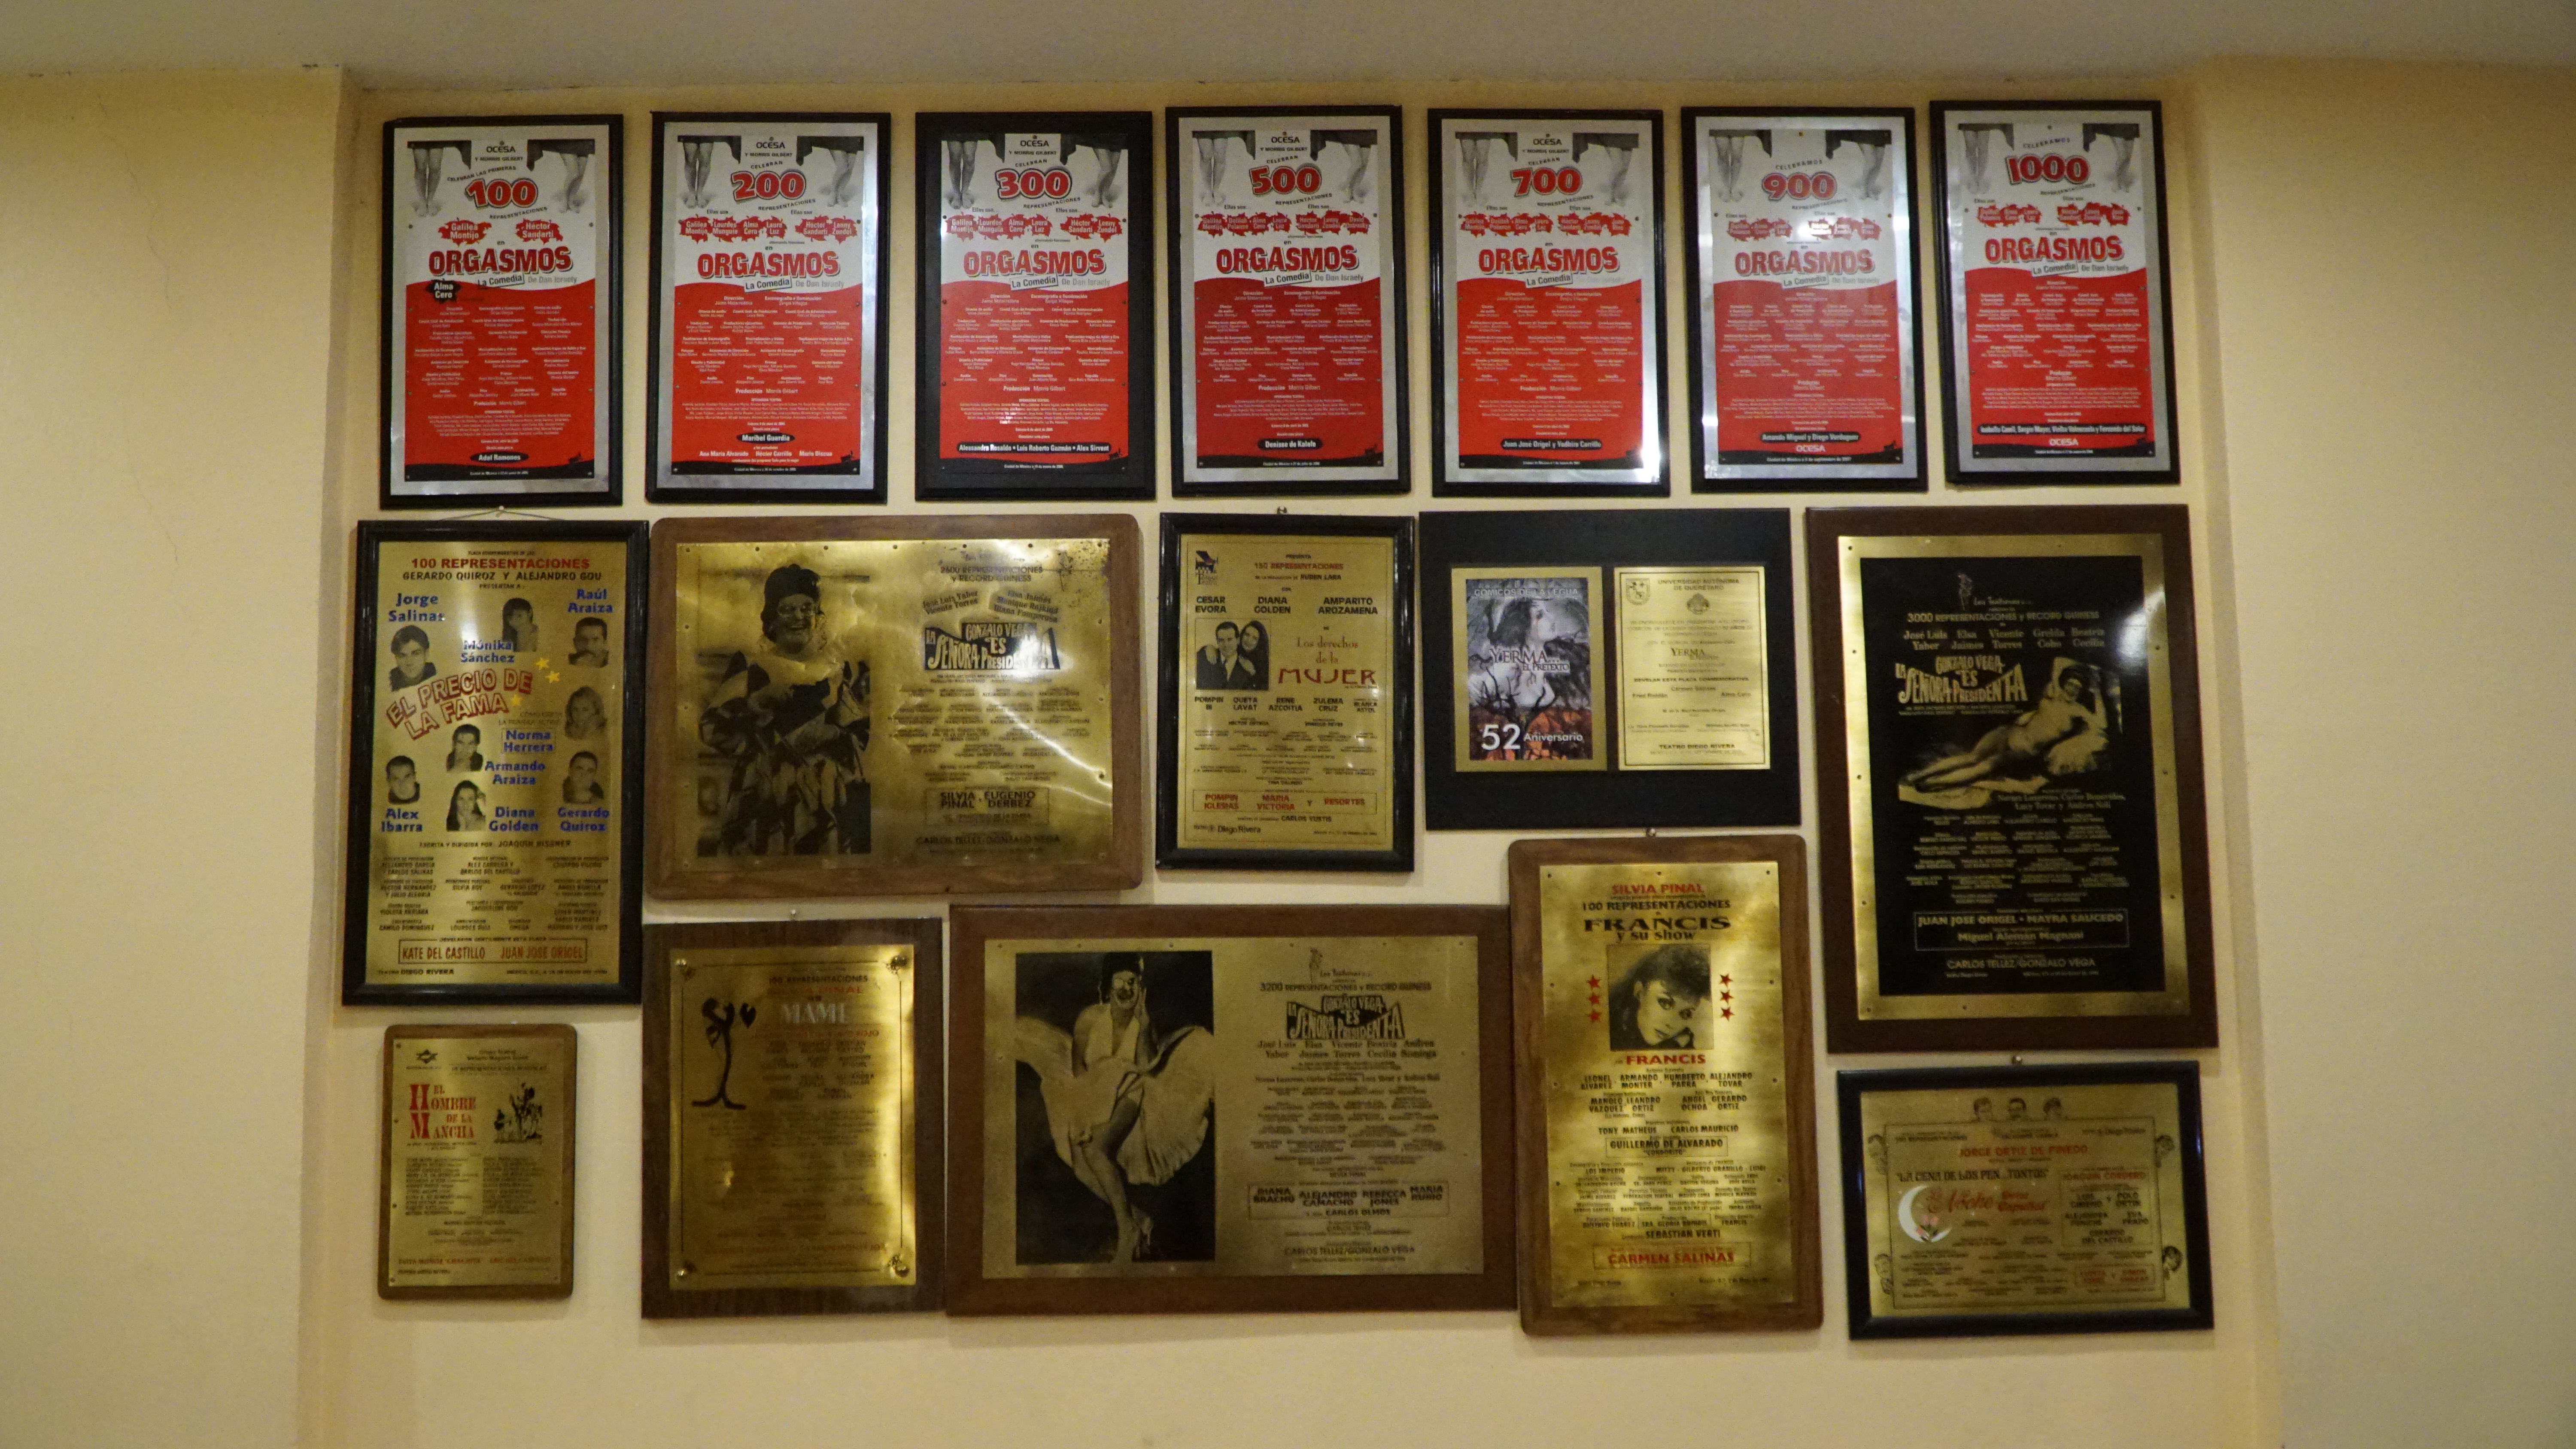 The New Silvia Pinal Theater has paraphernalia and plaques of the diva's works (Photo: Lalo Cano)